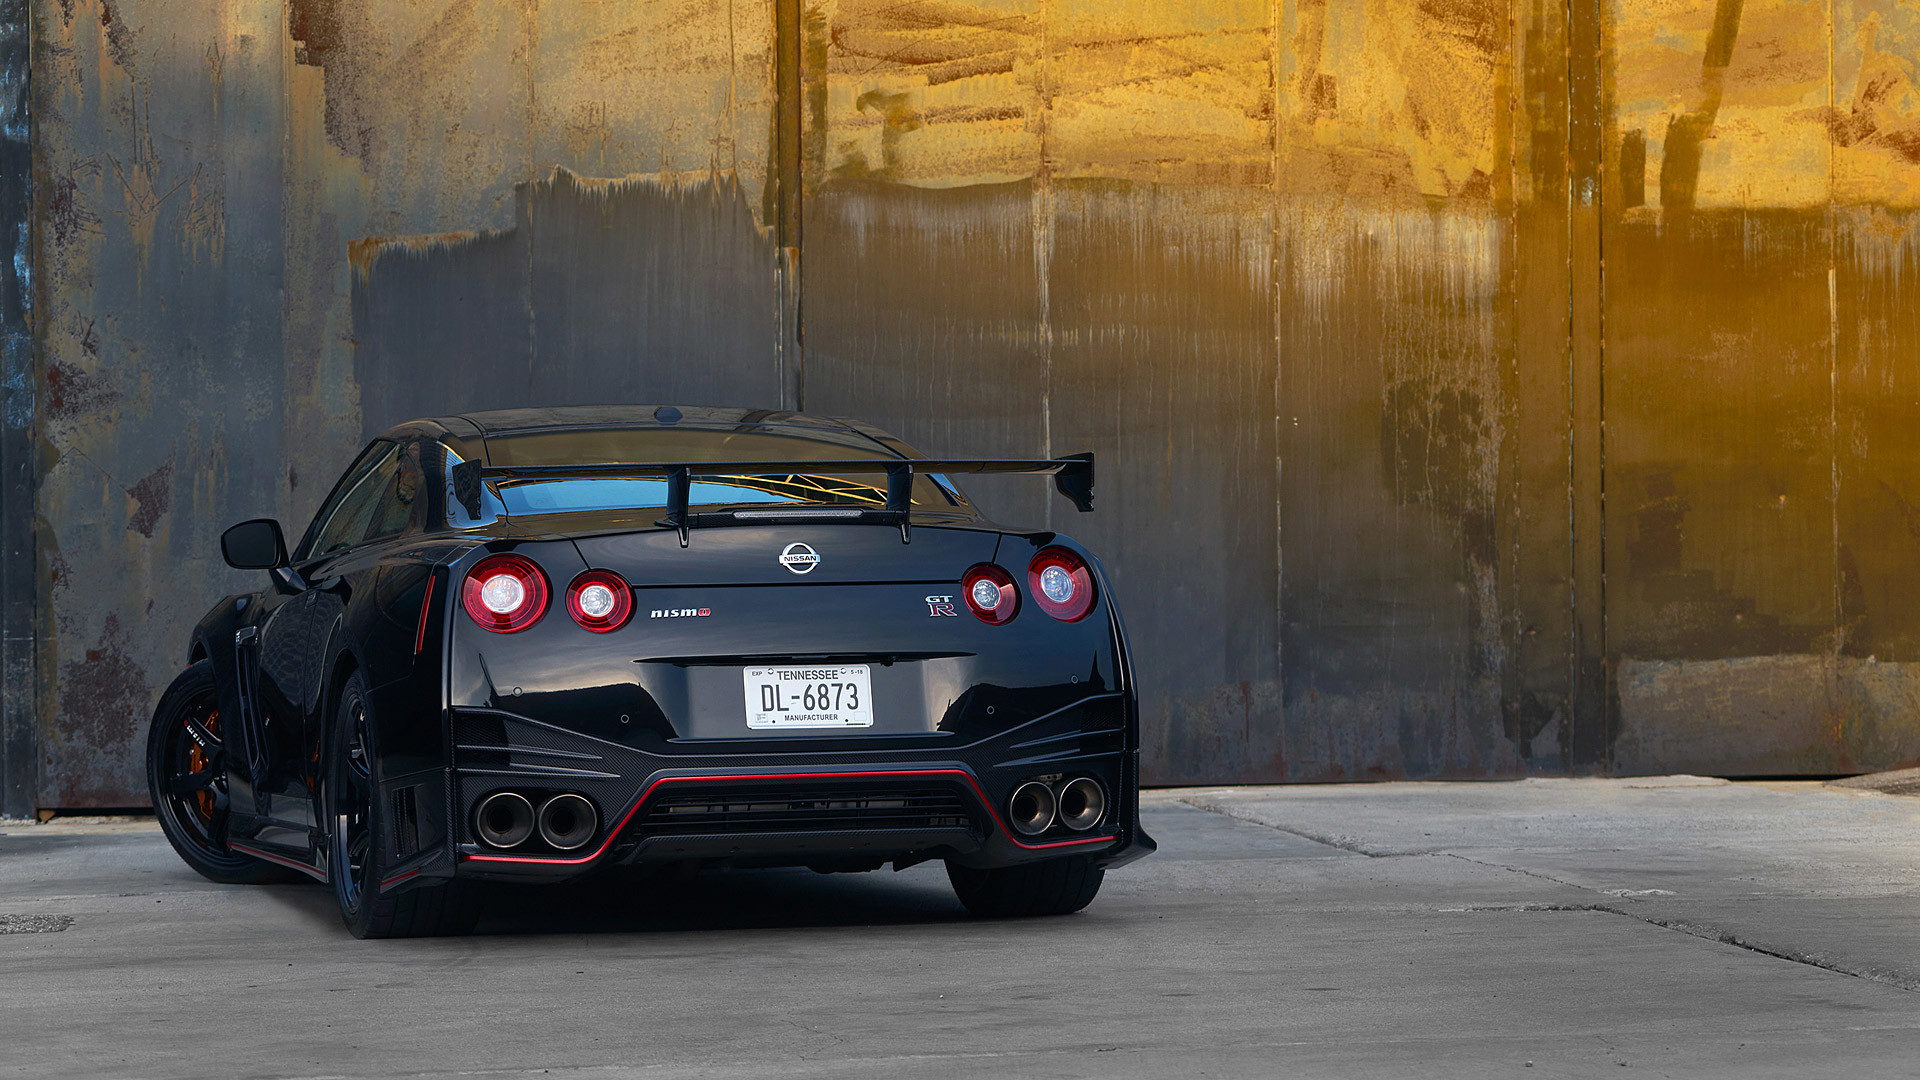 1920x1080 2017 Nissan GT-R Nismo picture.